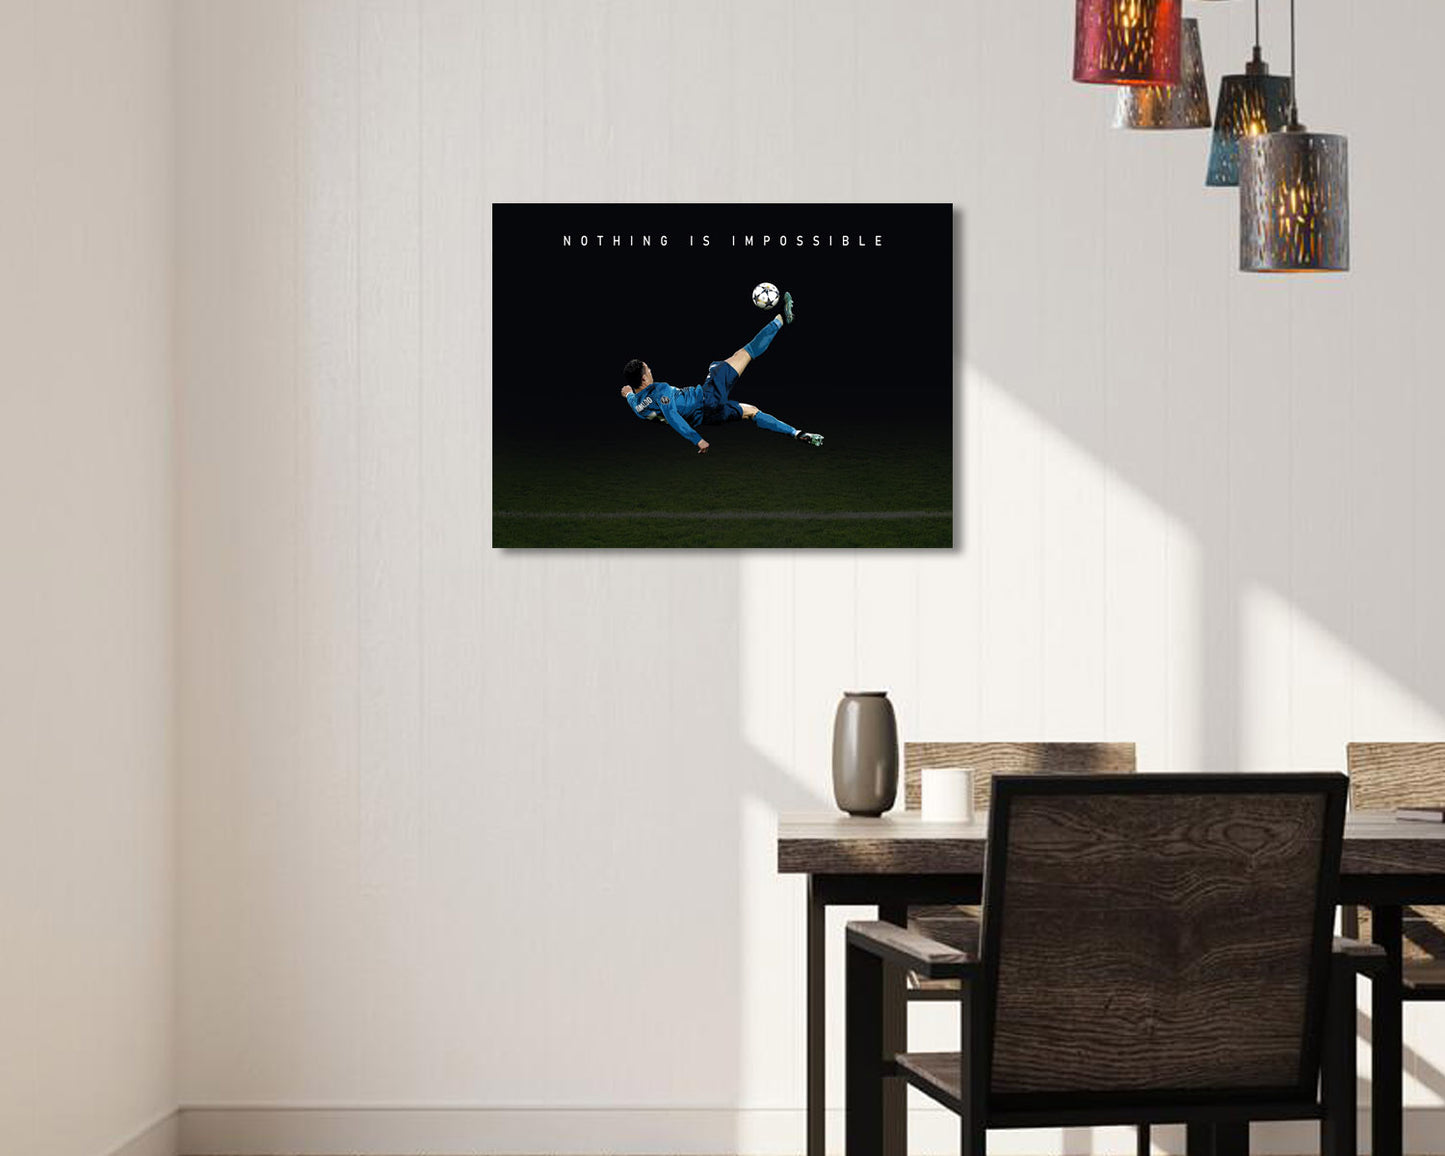 Cristiano Ronaldo Nothing is impossible Sport Quote Canvas Wall Art 